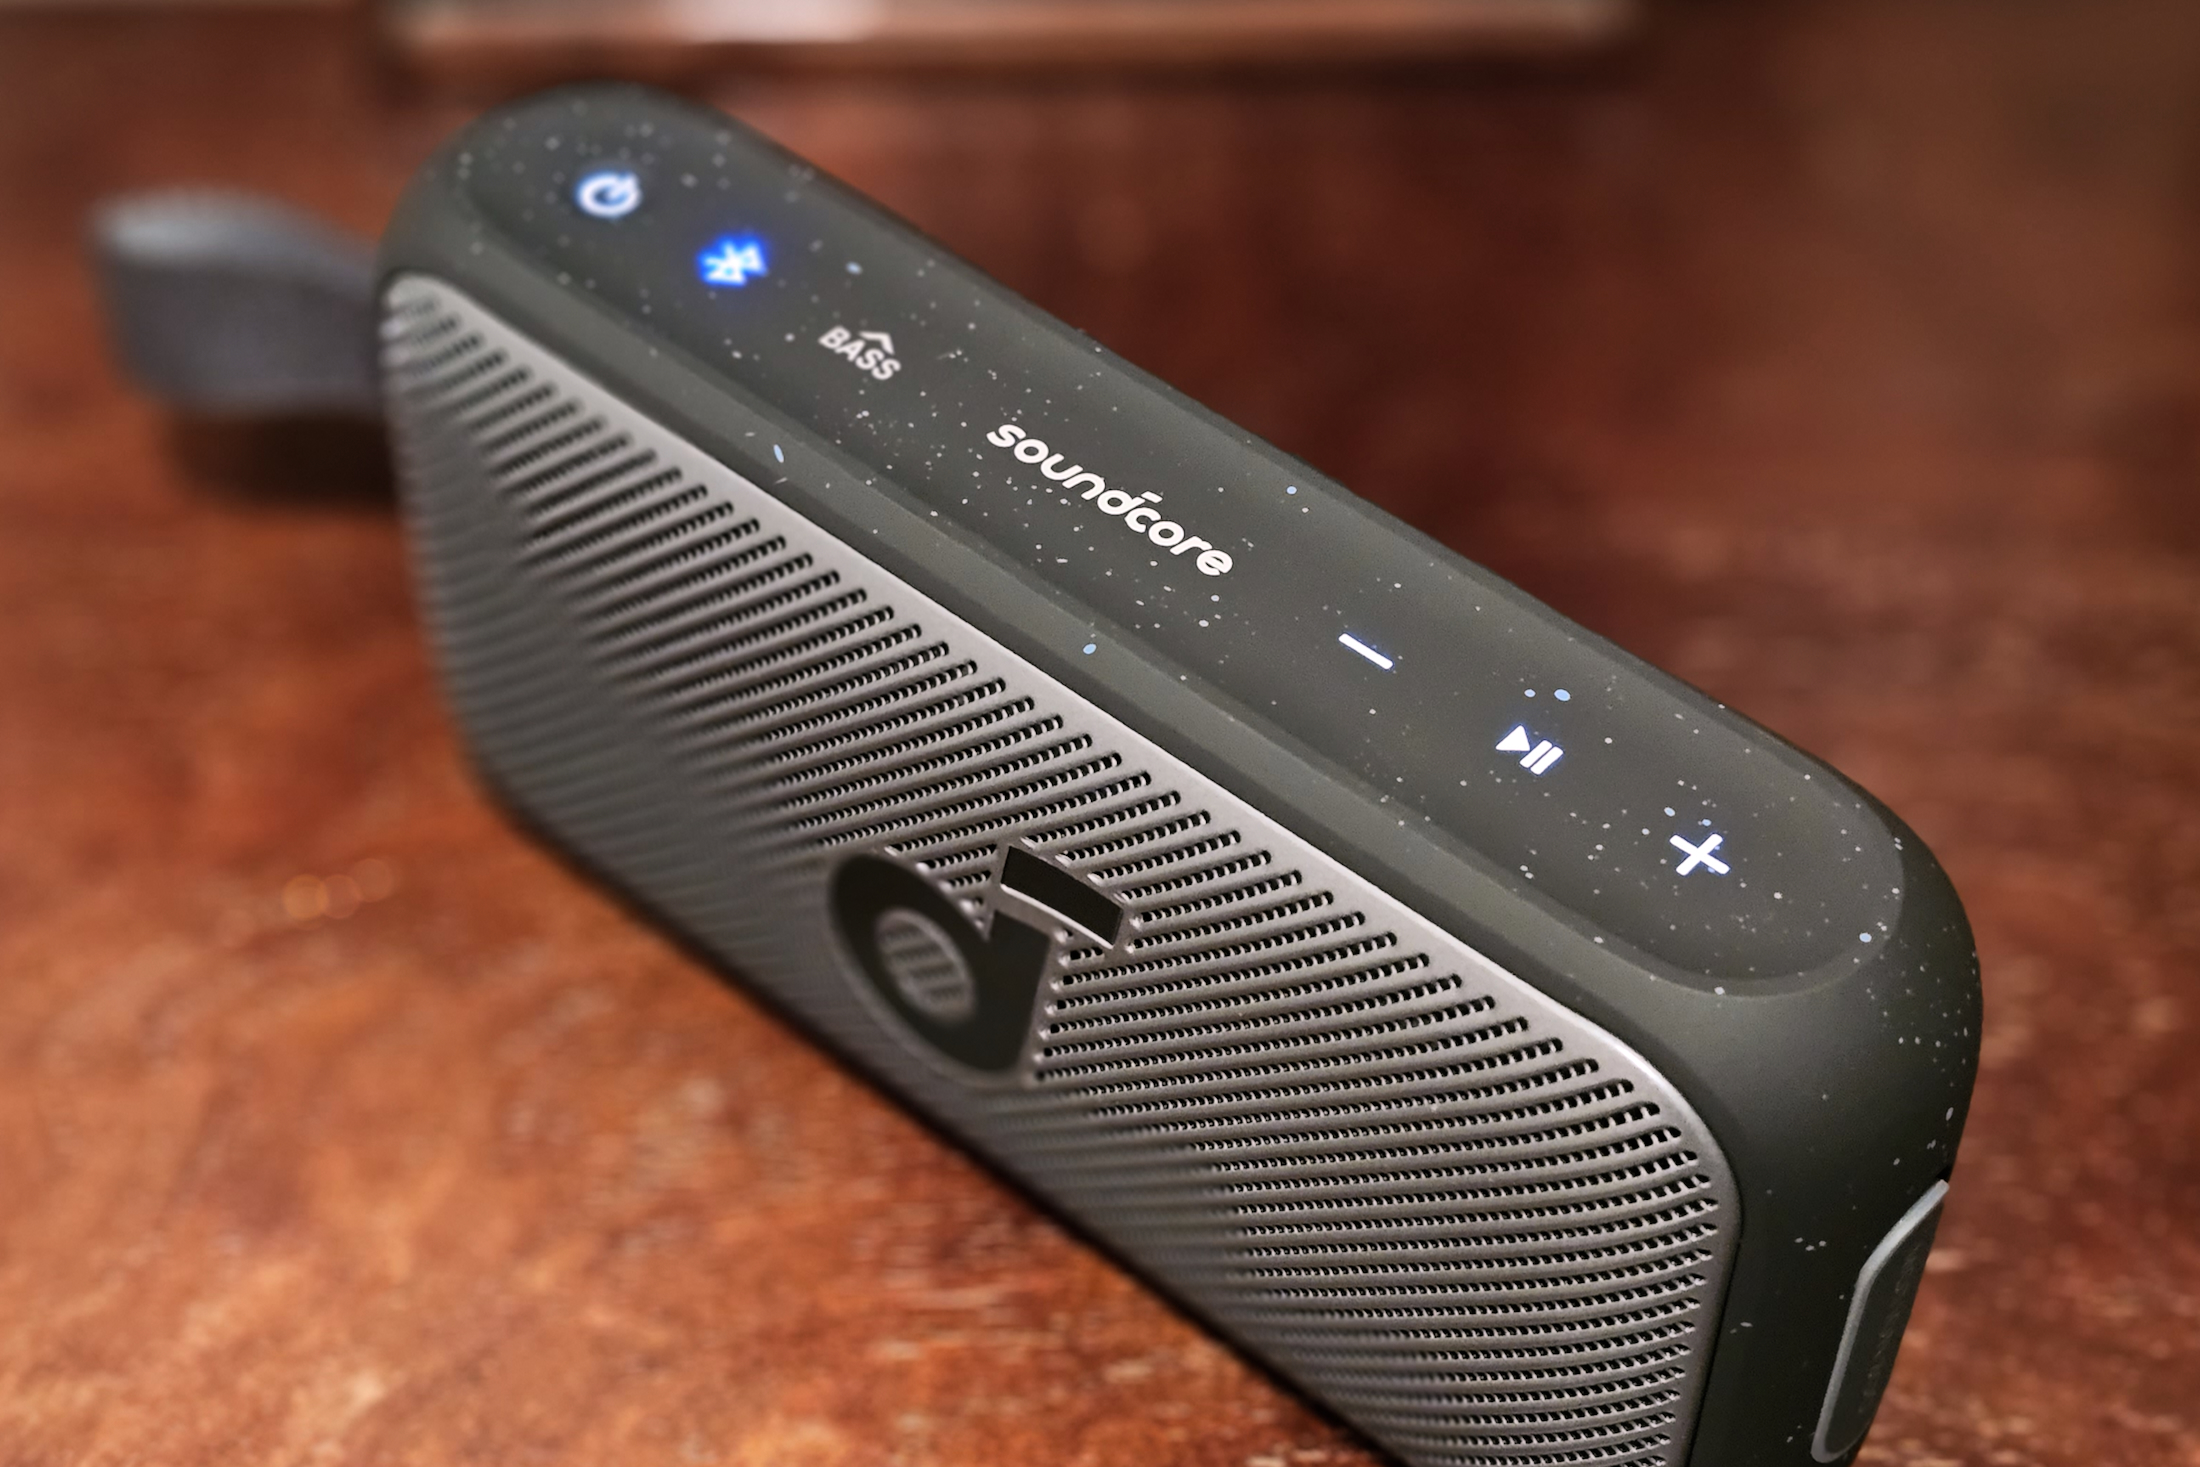 Best portable Bluetooth speakers in Canada 2023